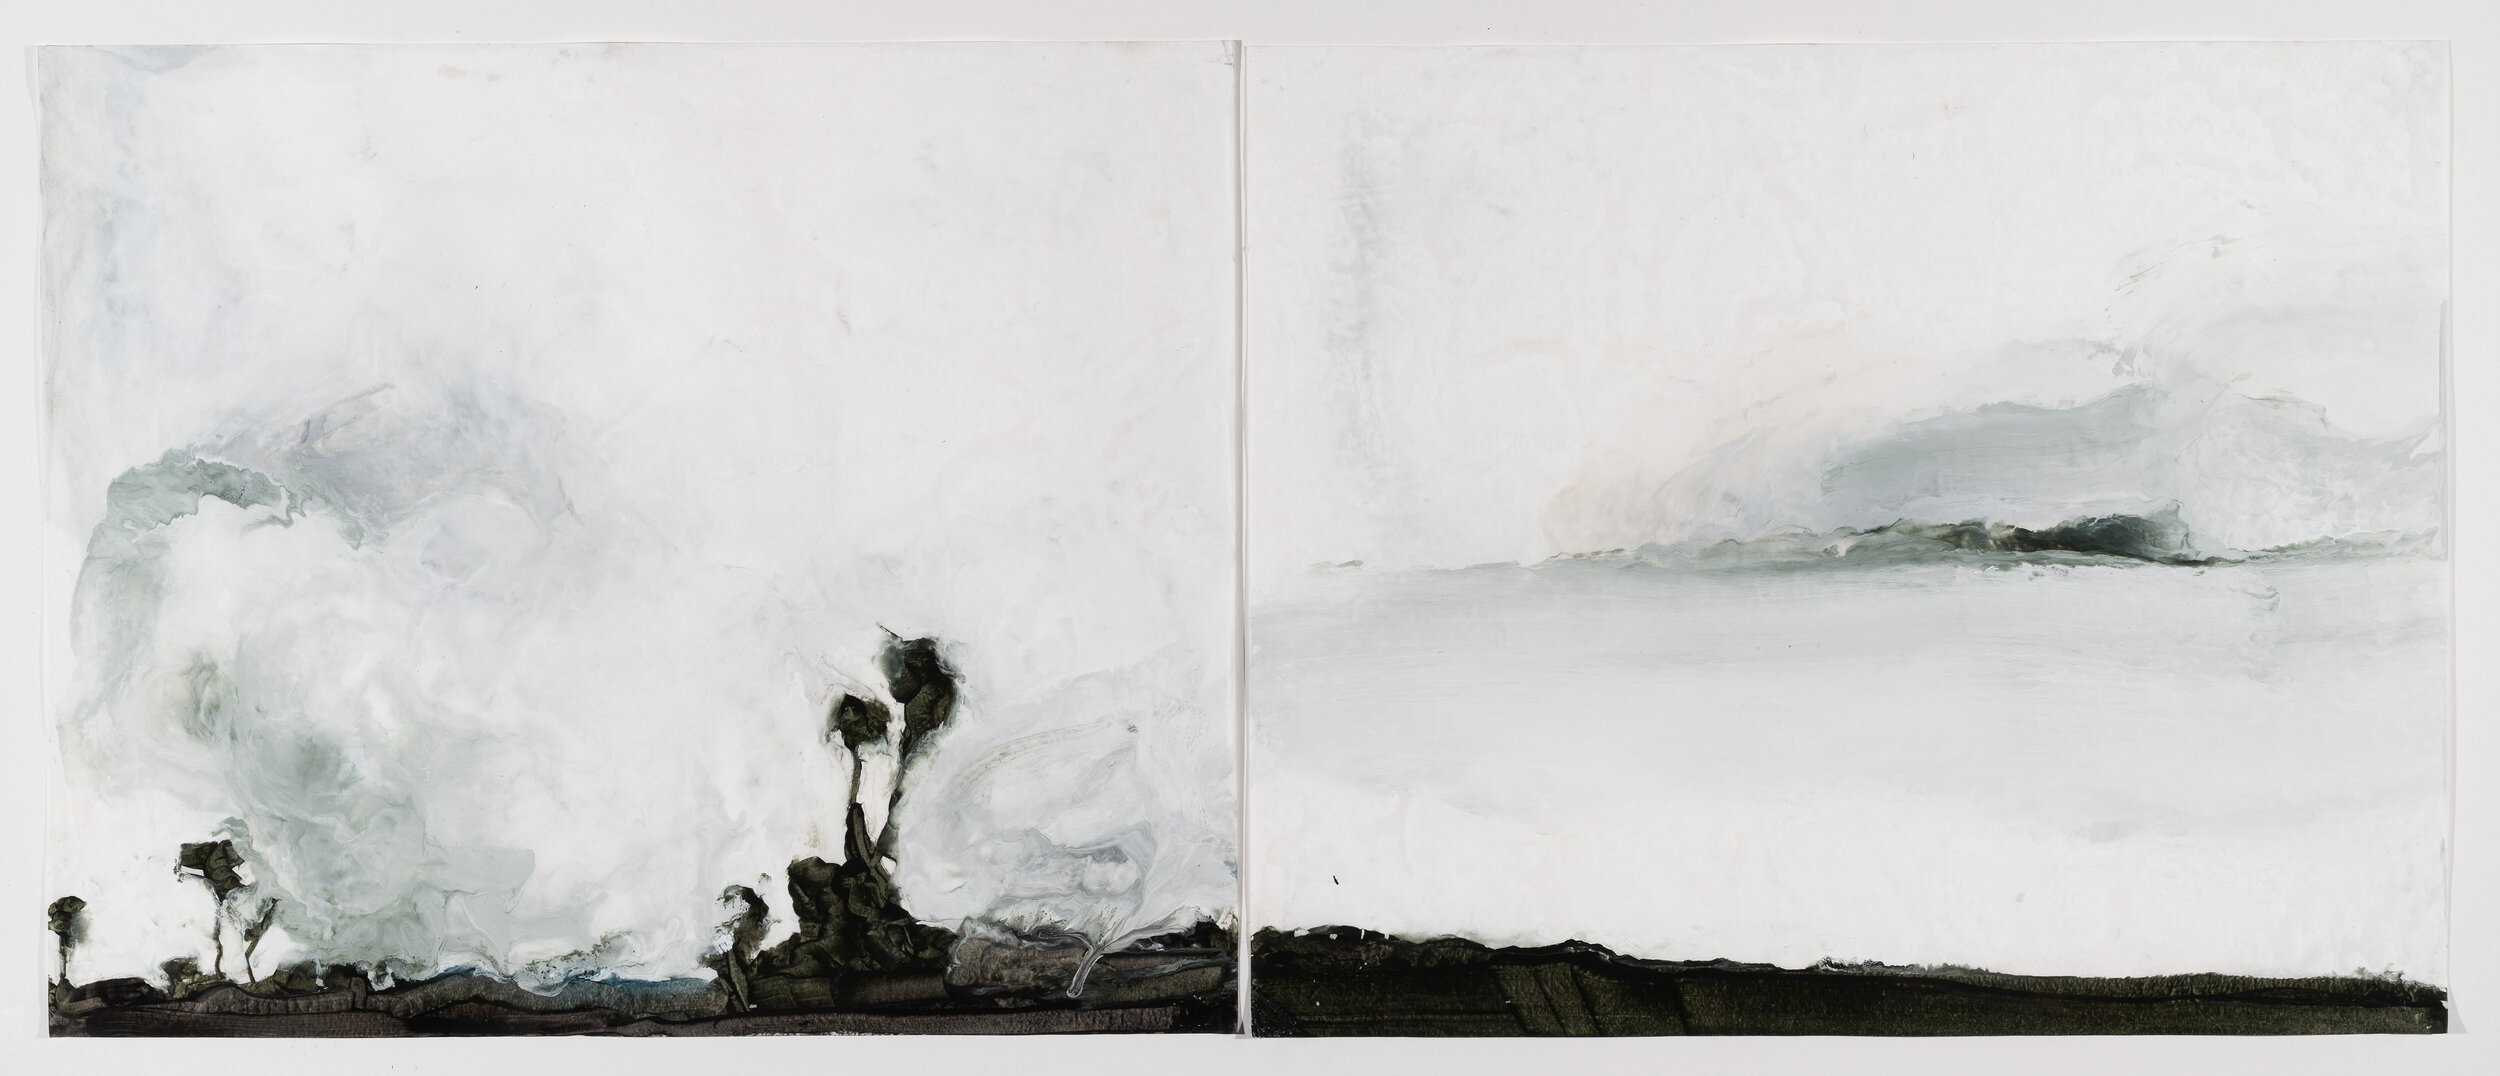 Gardiner’s Island, 2019, diptych, encaustic wax on Japanese rice paper, 32 x 56 in, $5,000